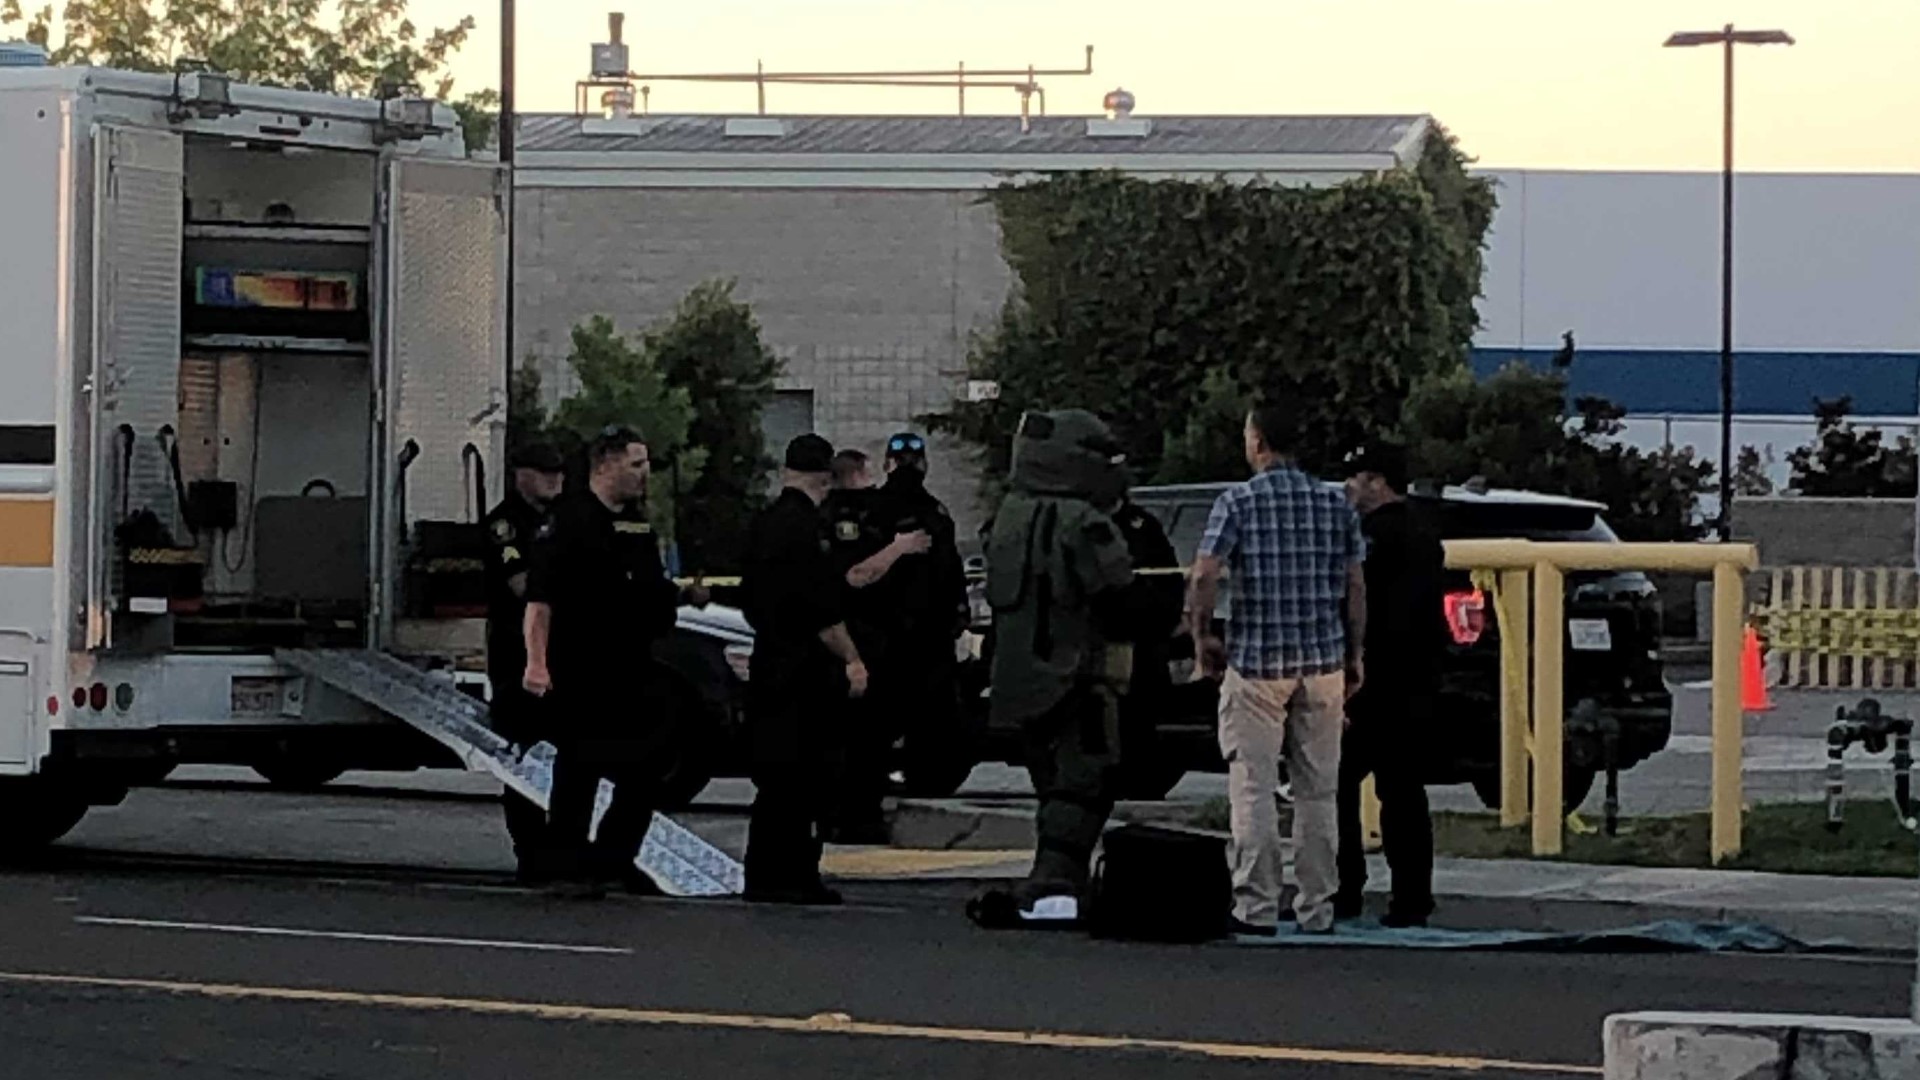 According to the San Joaquin Sheriff's office, a man called 911 around 5:30 p.m. and told dispatch that he was going into a 7-Eleven with a bomb.